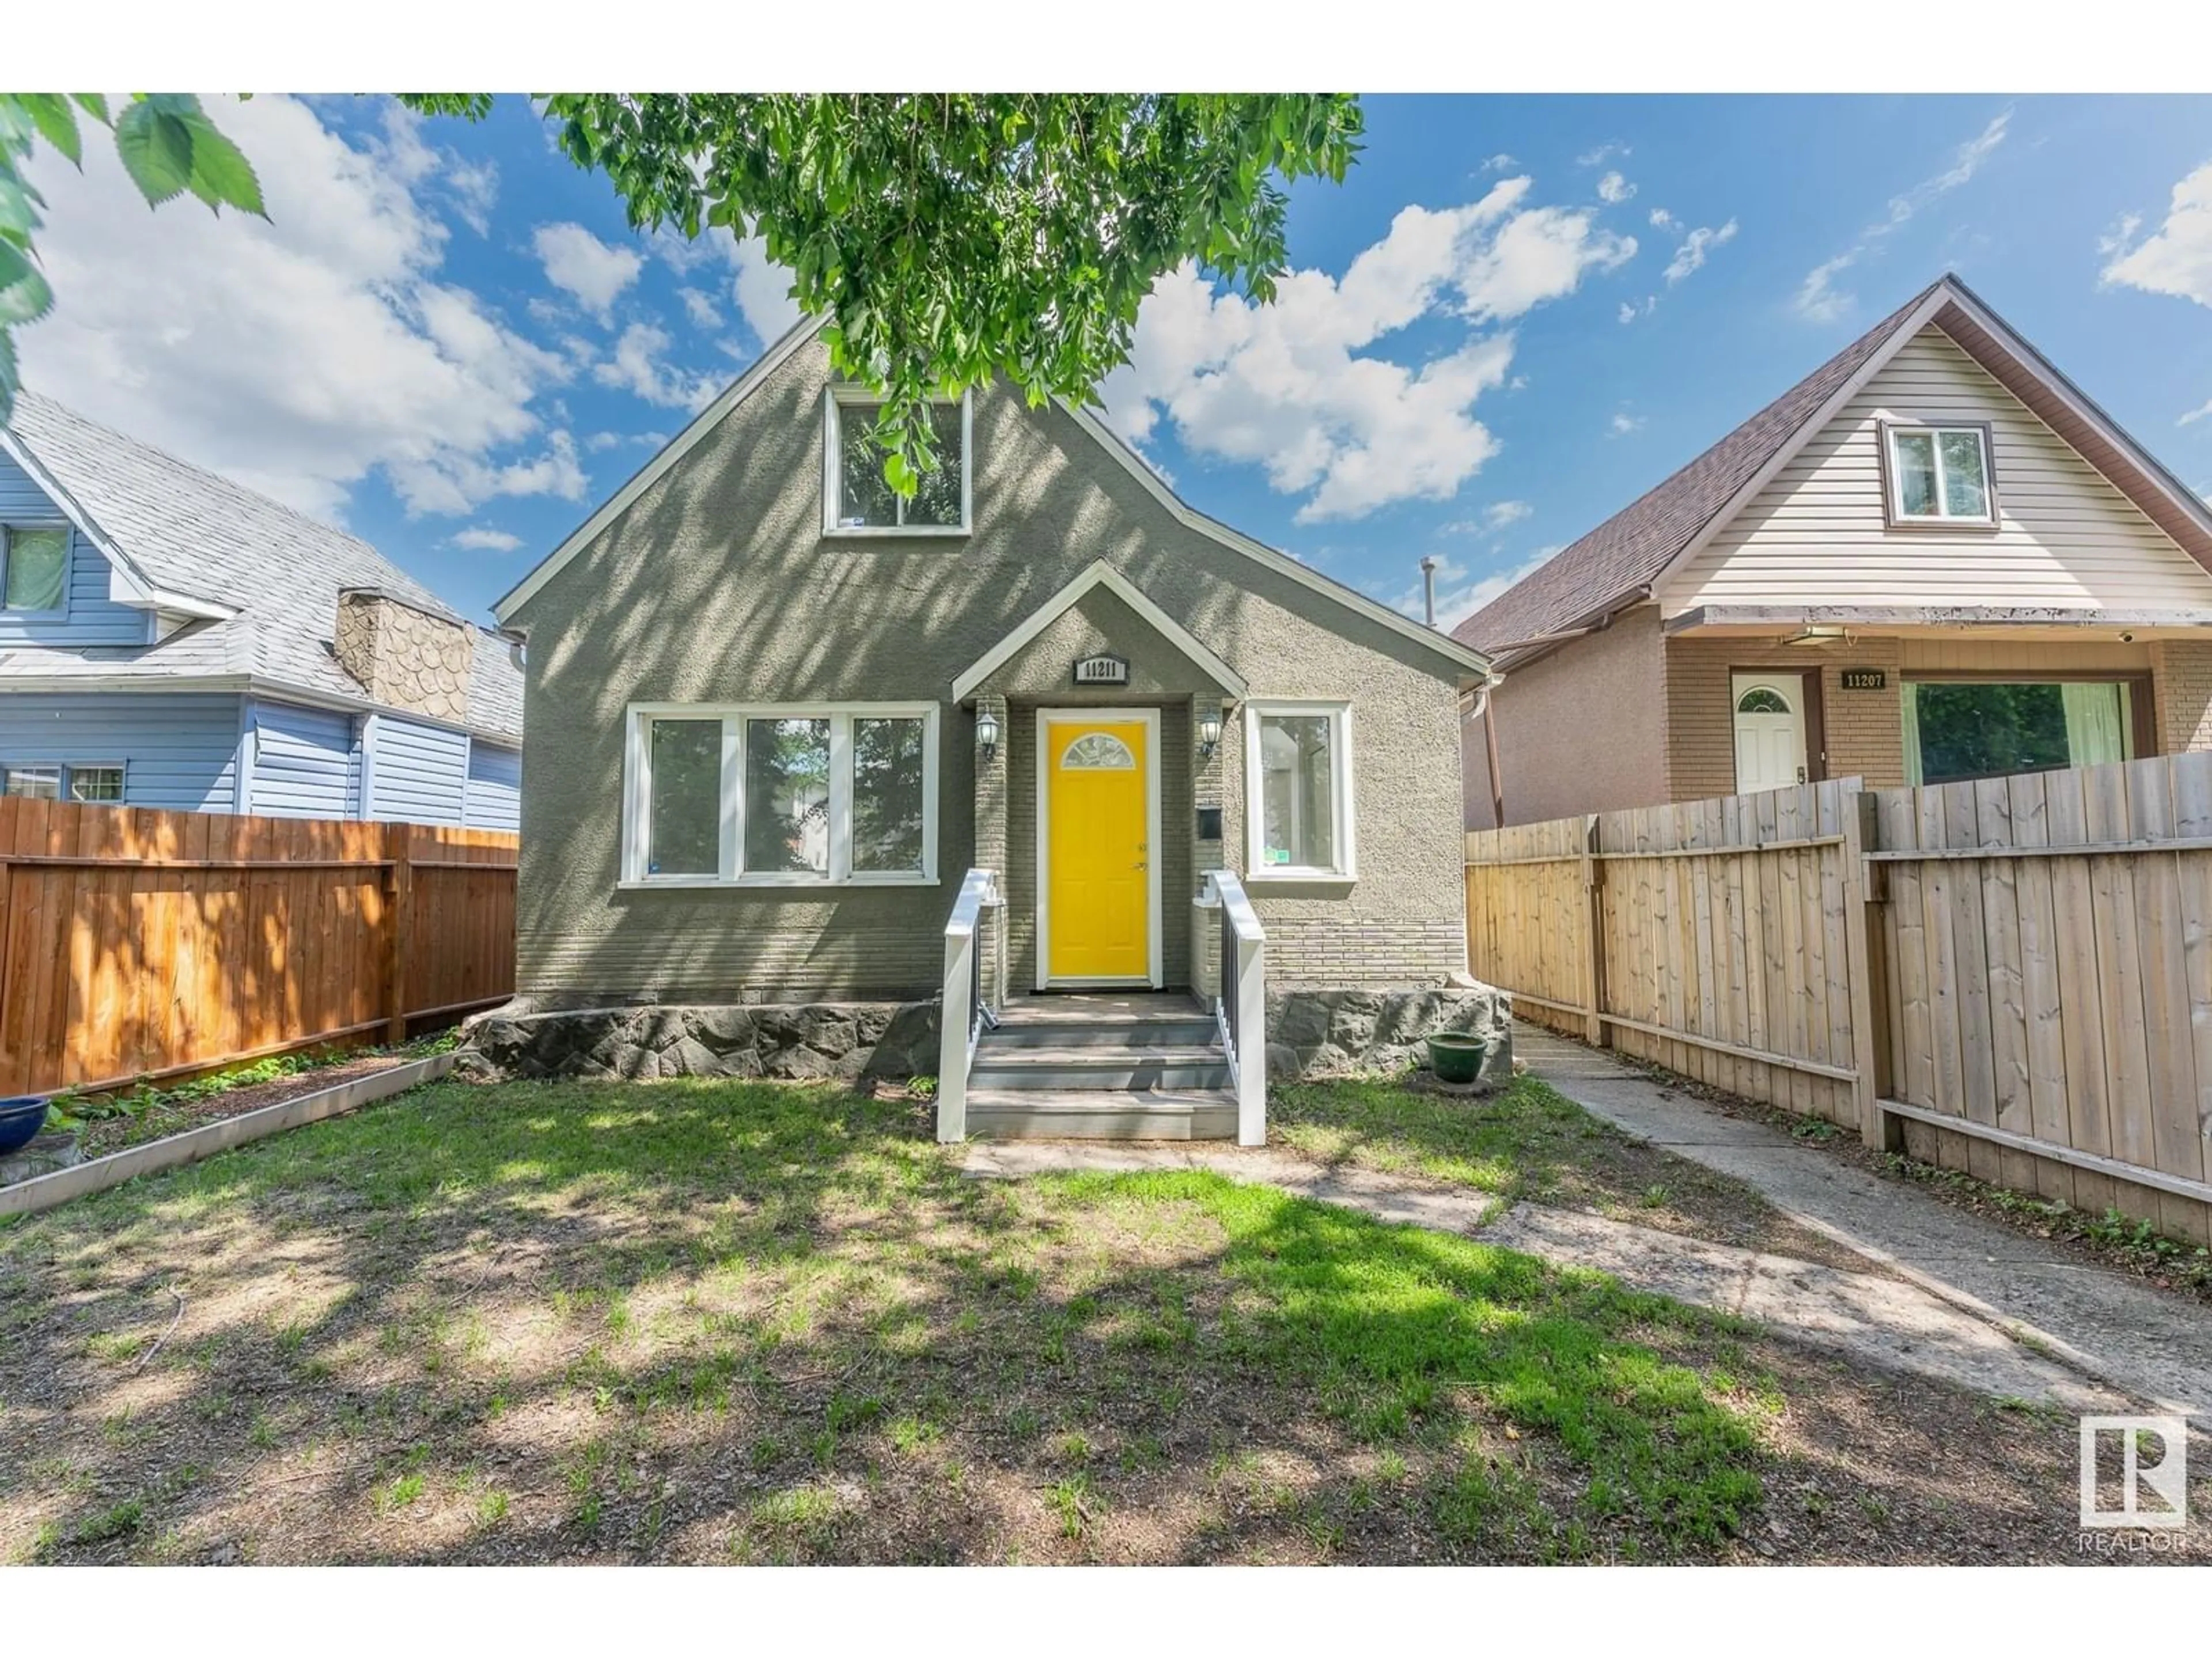 Frontside or backside of a home for 11211 93 ST NW, Edmonton Alberta T5G1B9